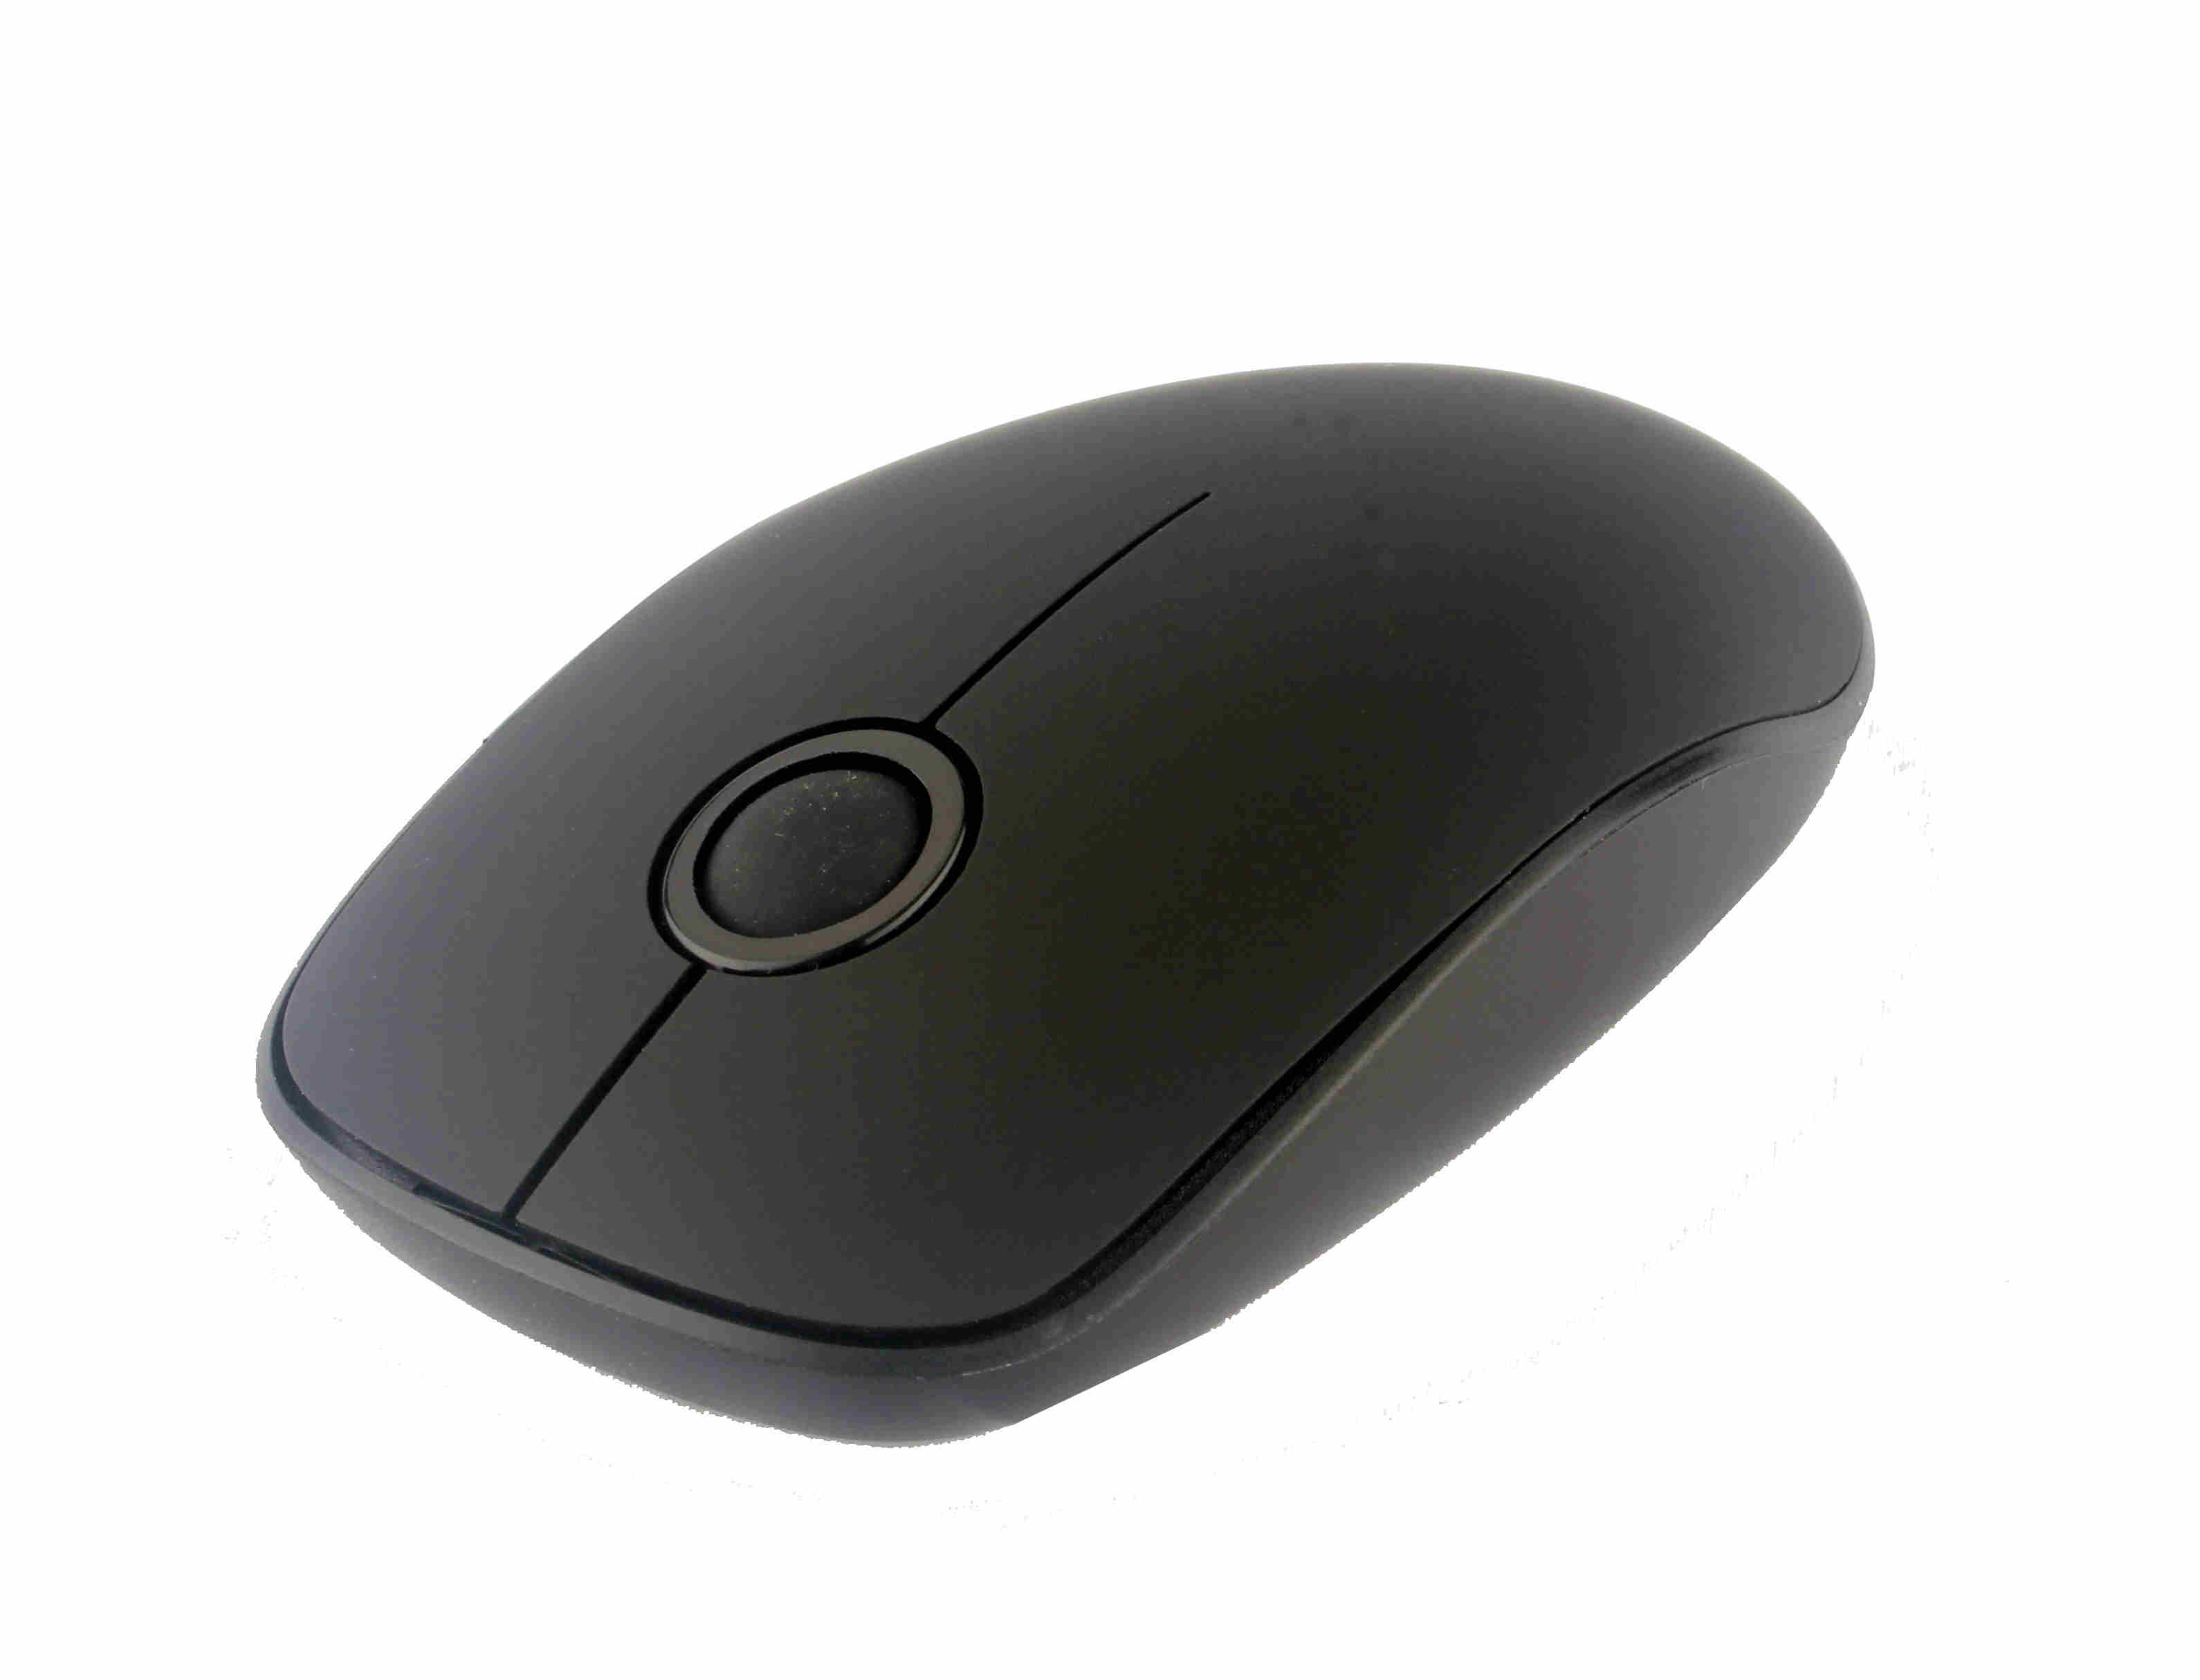 Silent Wireless Mouse,Mute Wireless Mouse,No Making Noise,3 Buttons,1200 DPI